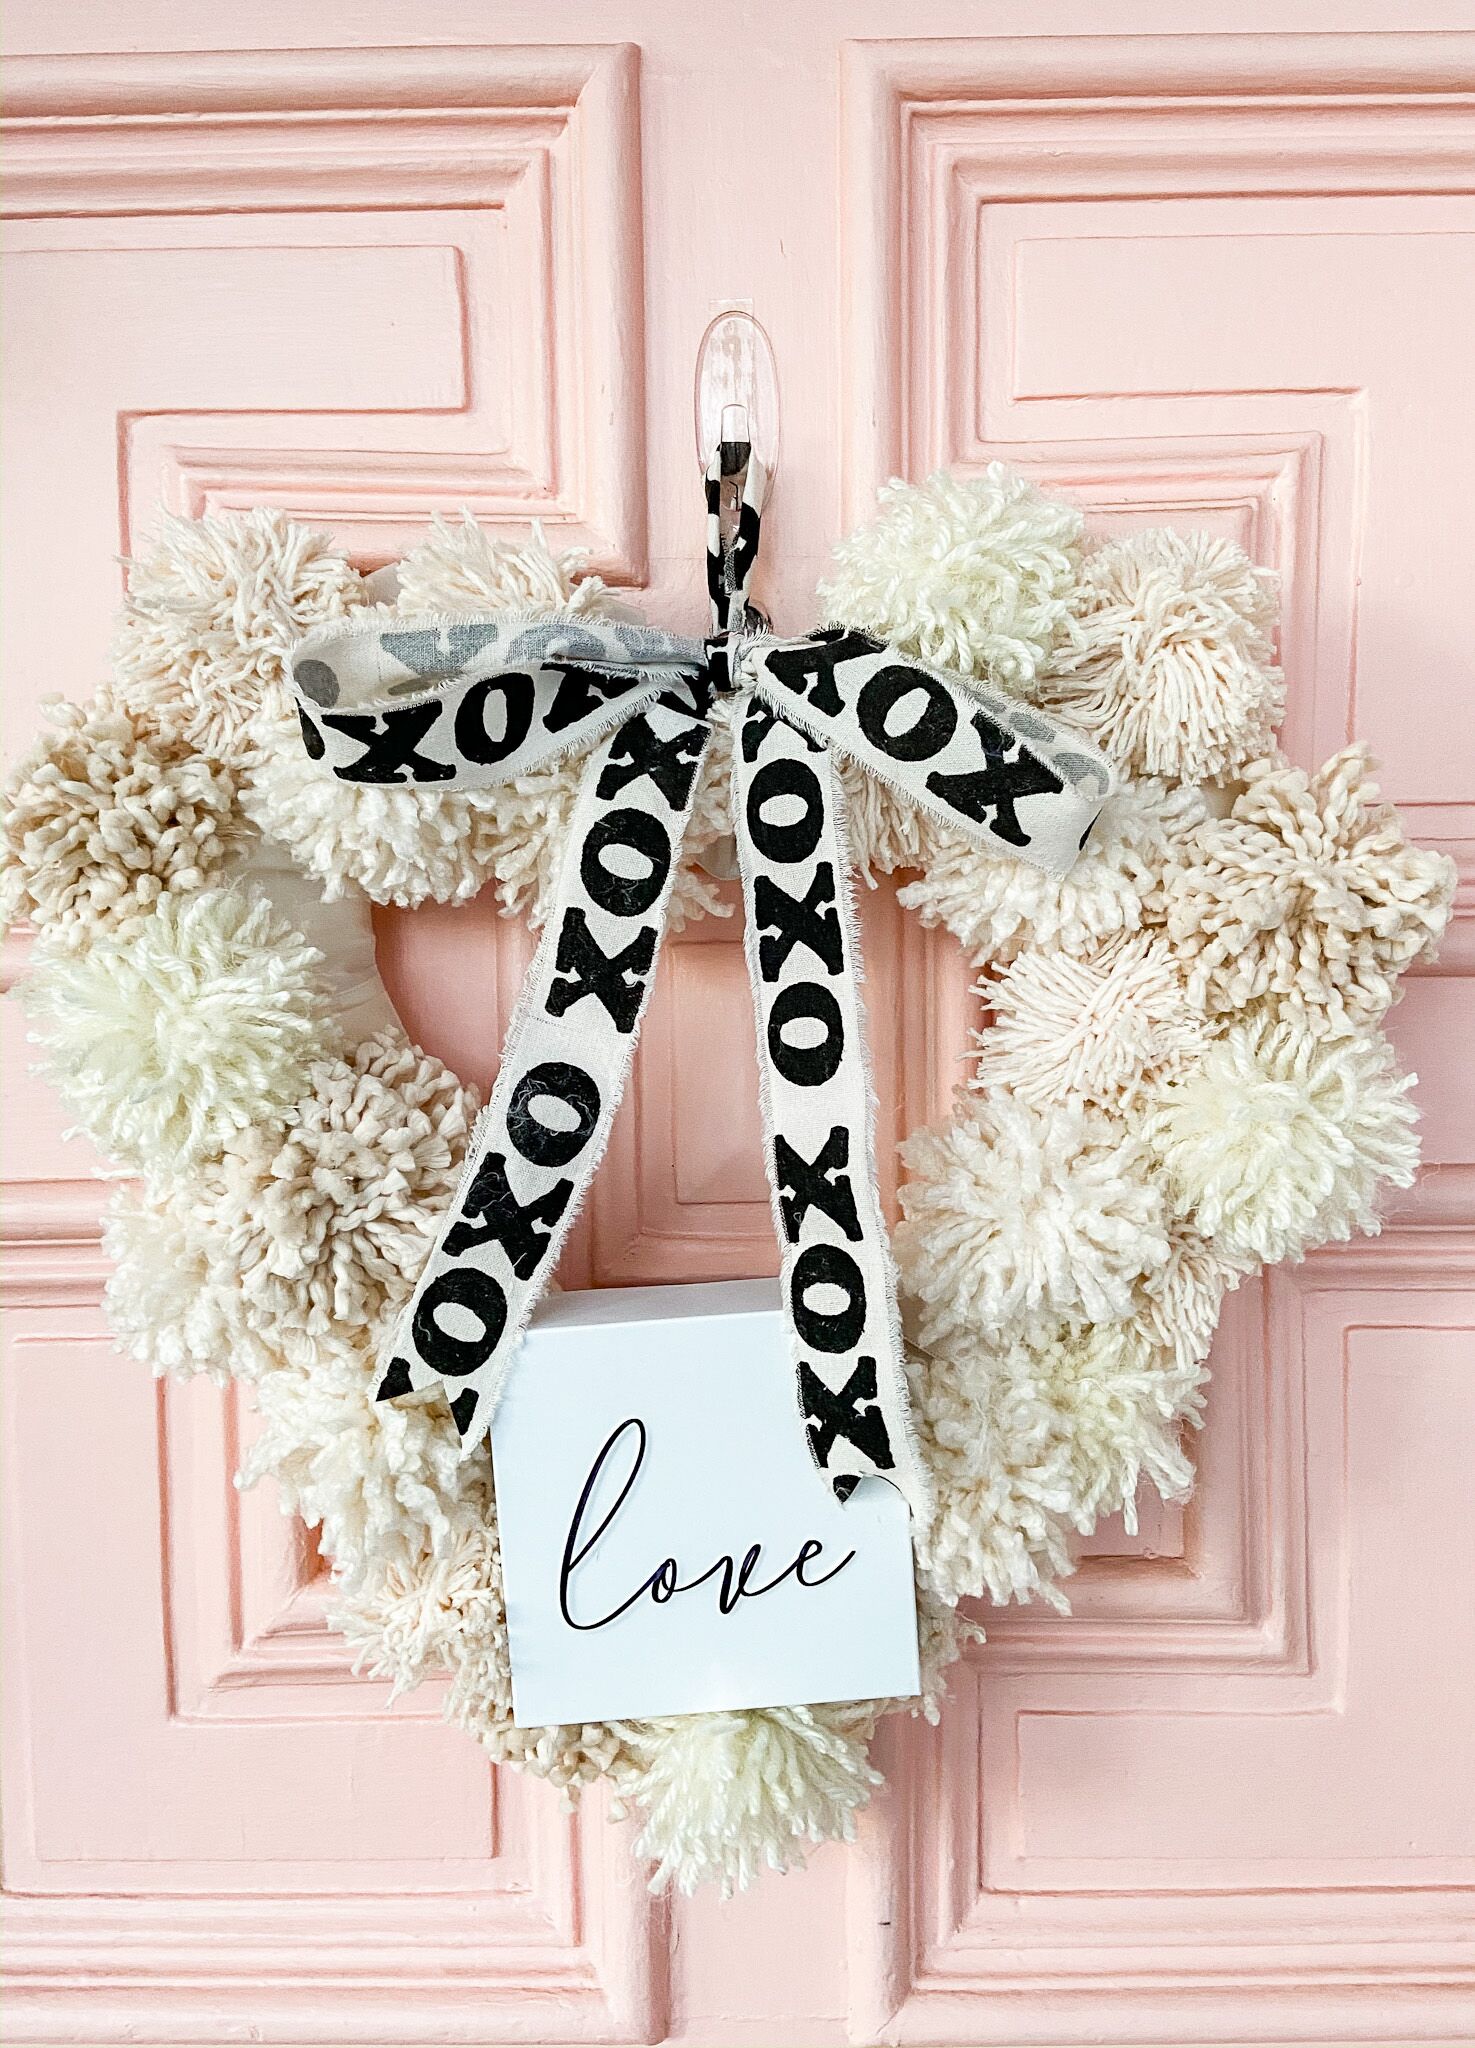 How to Make a Valentine Heart Pom Pom Yarn Wreath. Brighten up your door this winter with a textured pom pom wreath for valentine's Day!